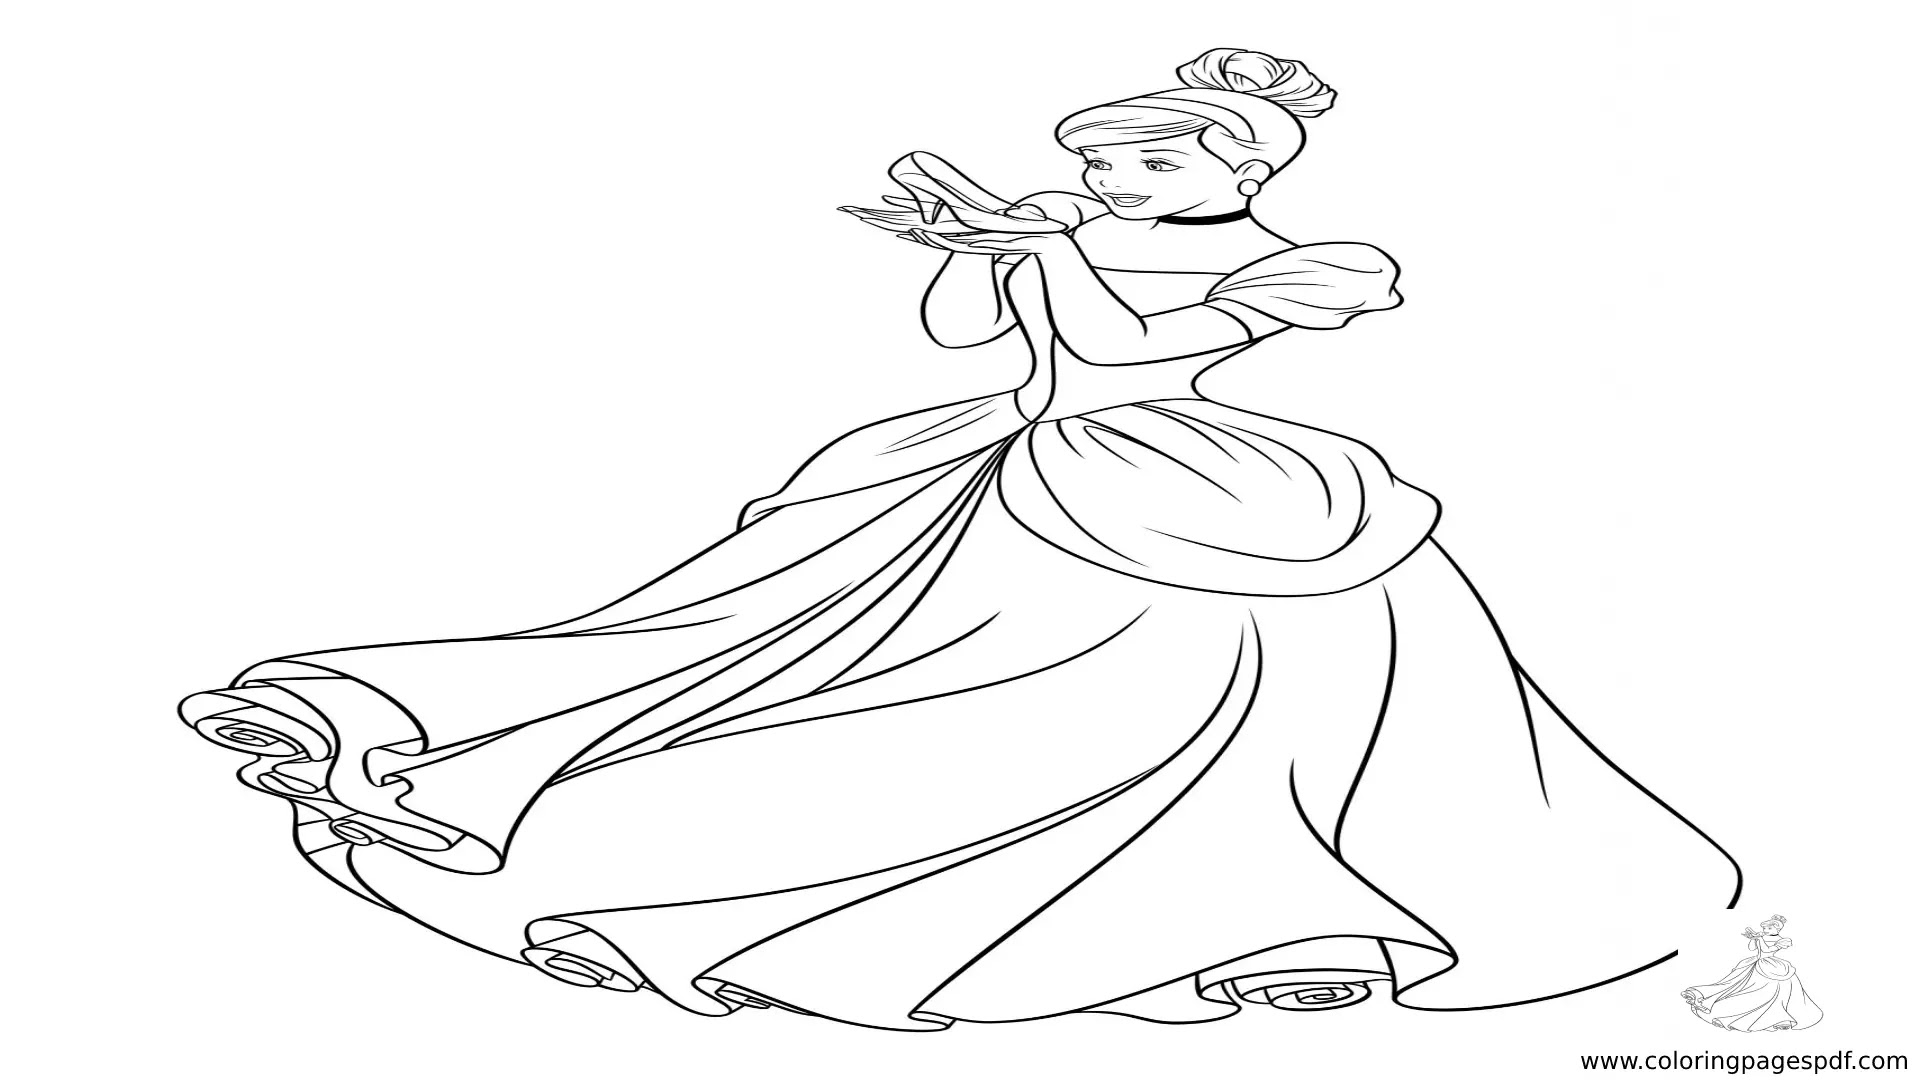 Coloring Pages Of Cinderella Holding The Glass Slipper